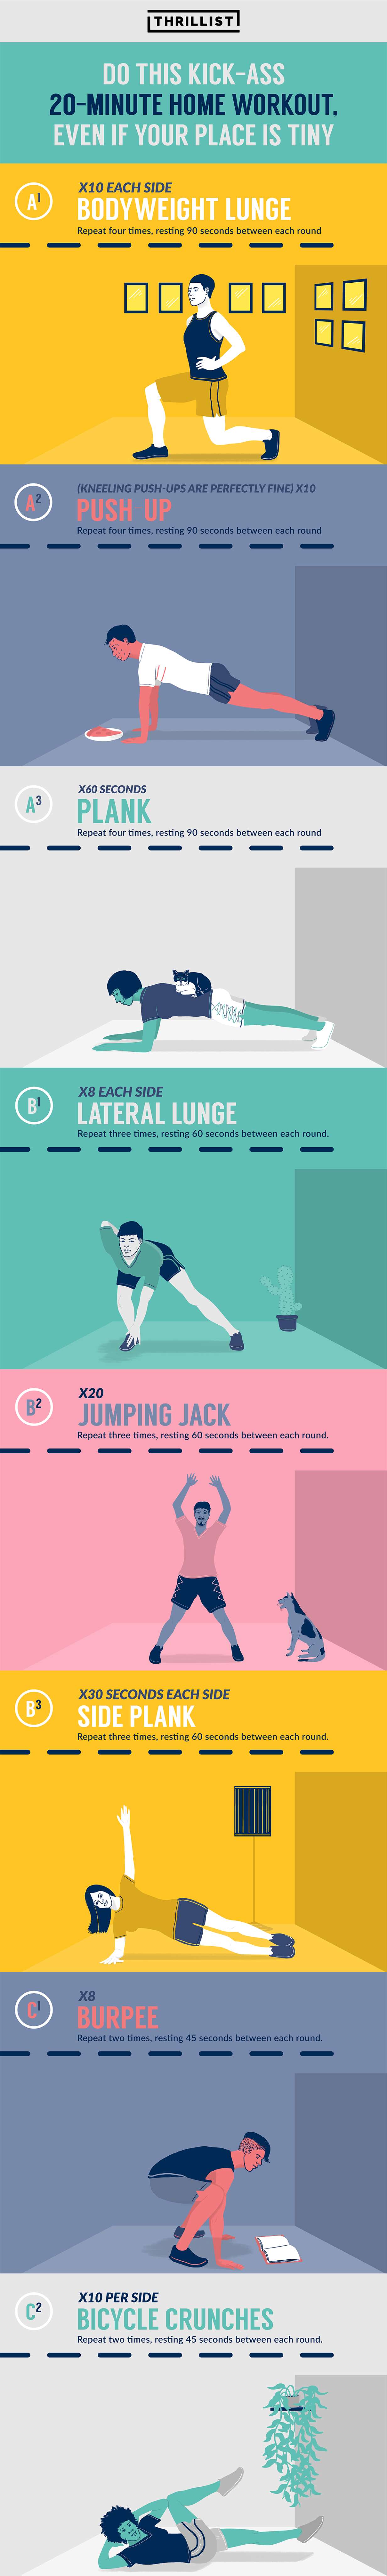 bodyweight home workout infographic